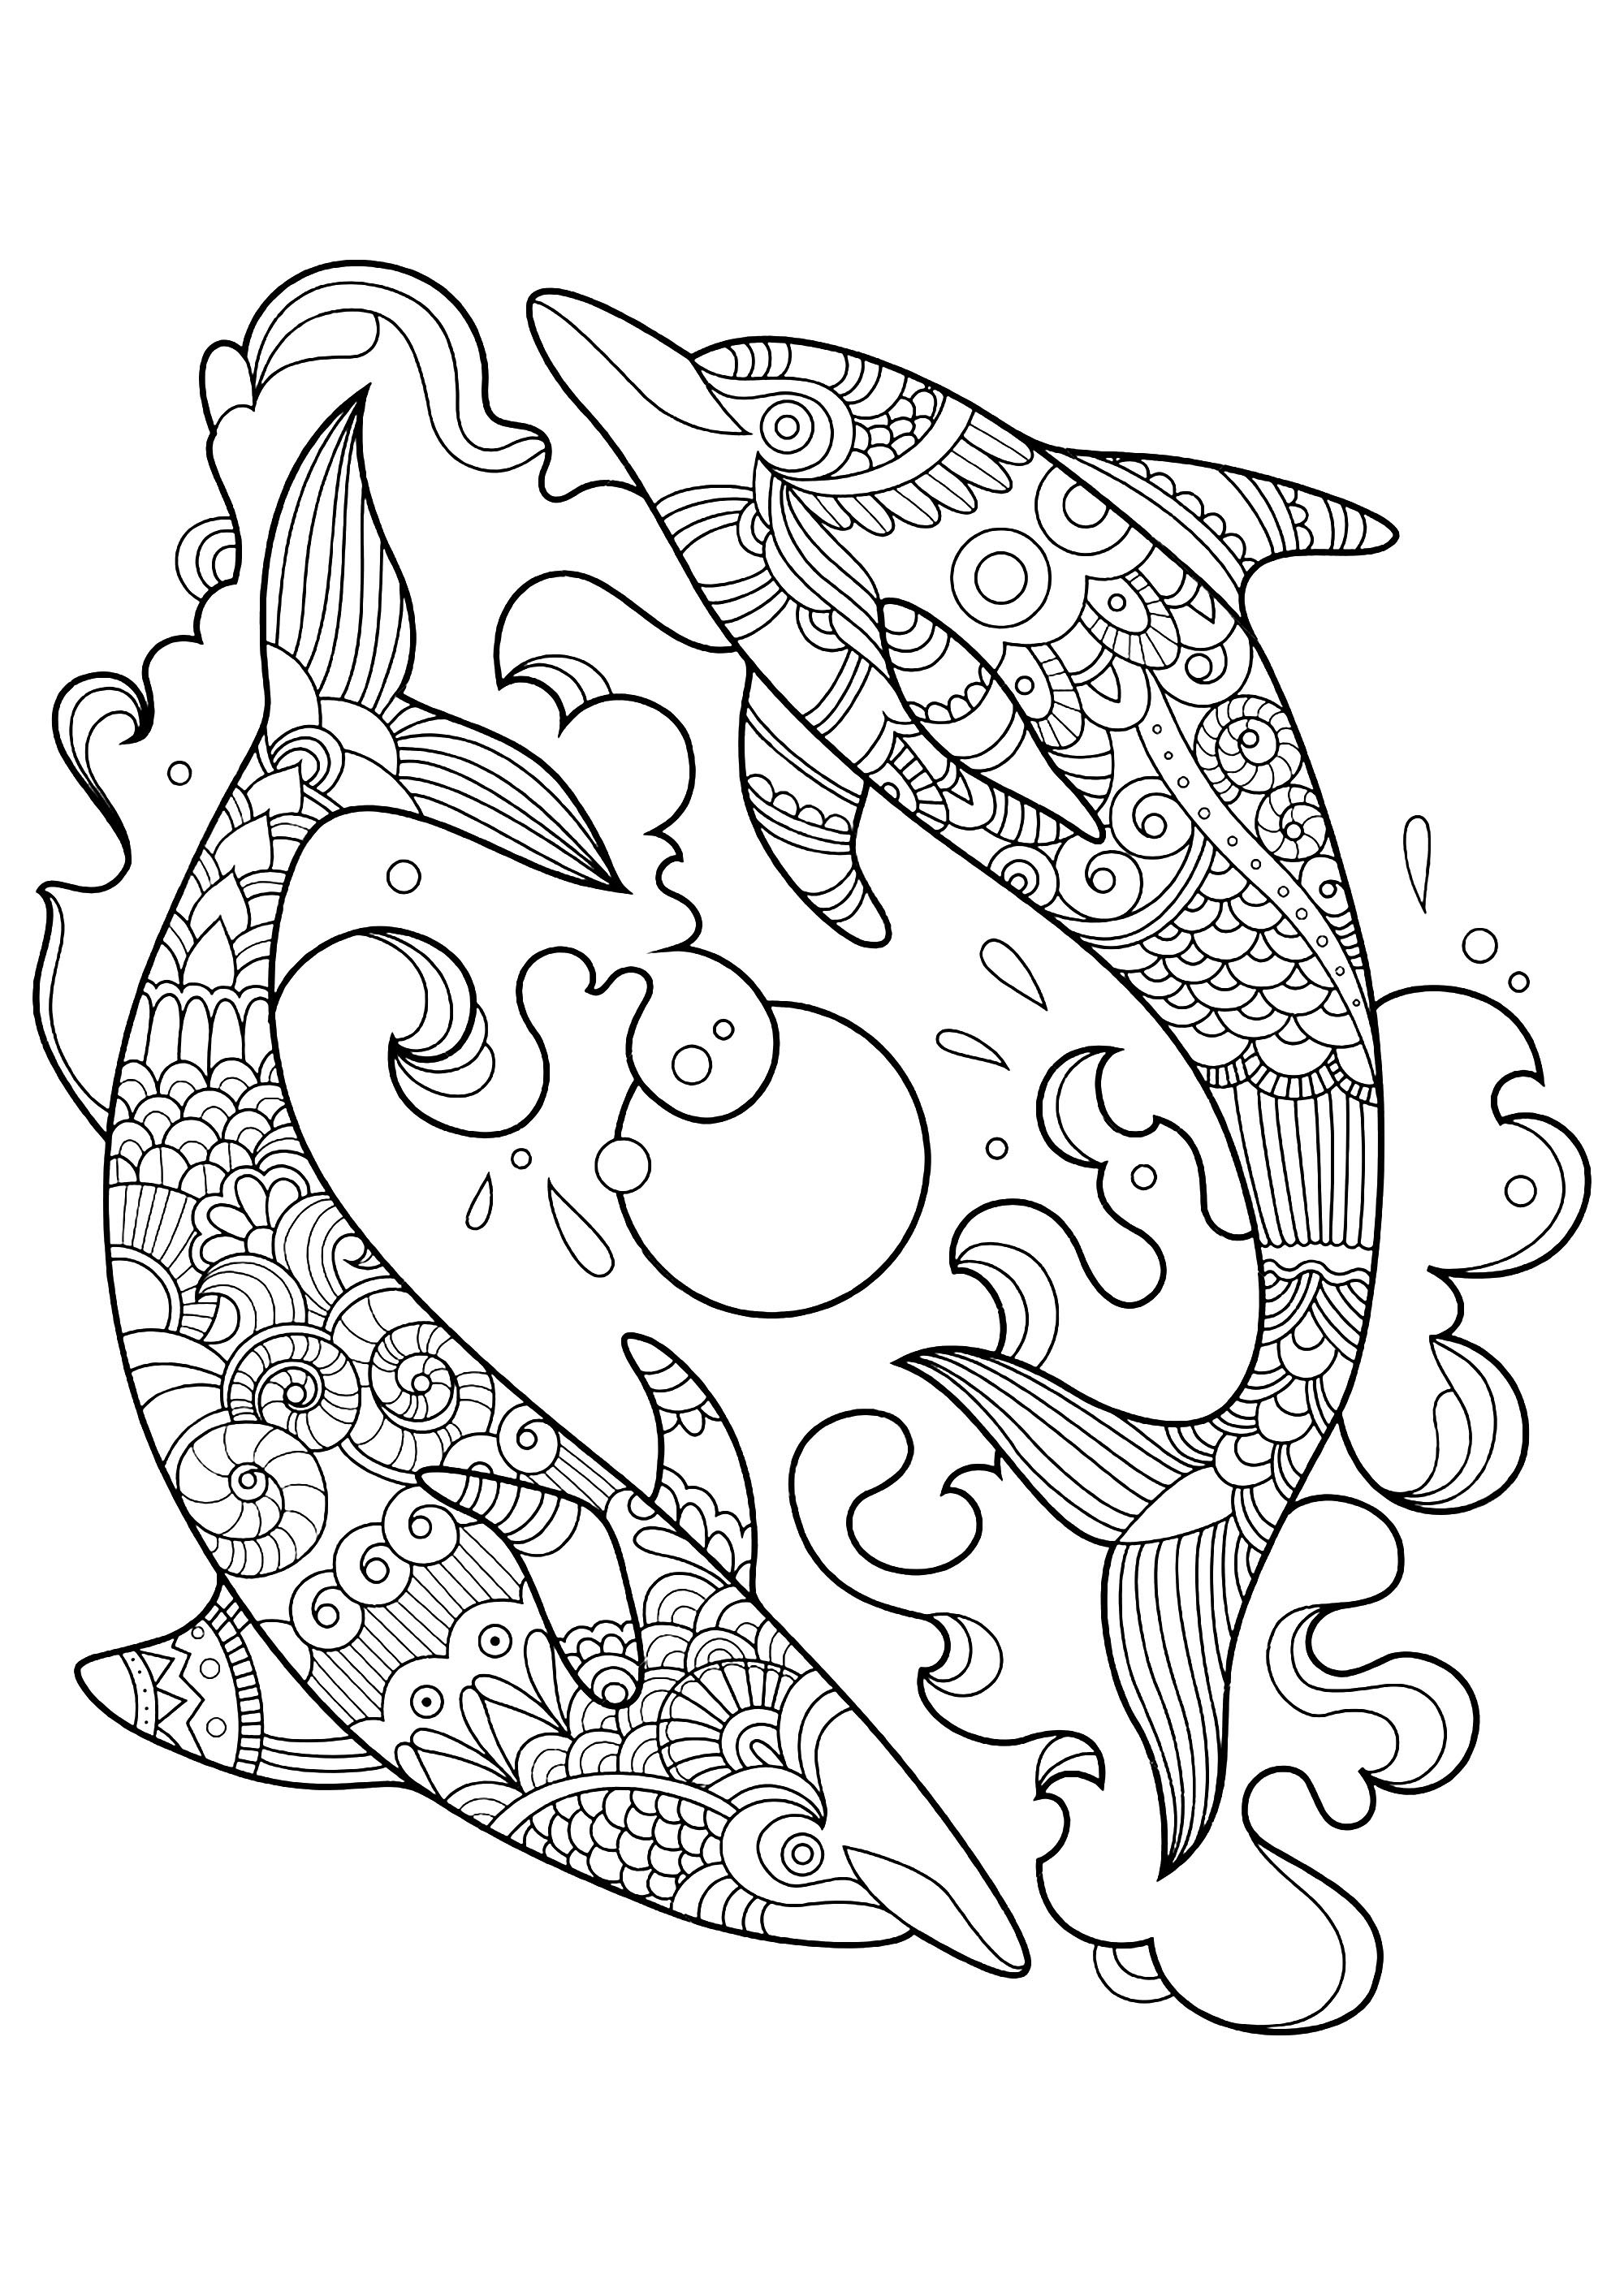 dolphin coloring sheets dolphins to color for children dolphins kids coloring pages coloring dolphin sheets 